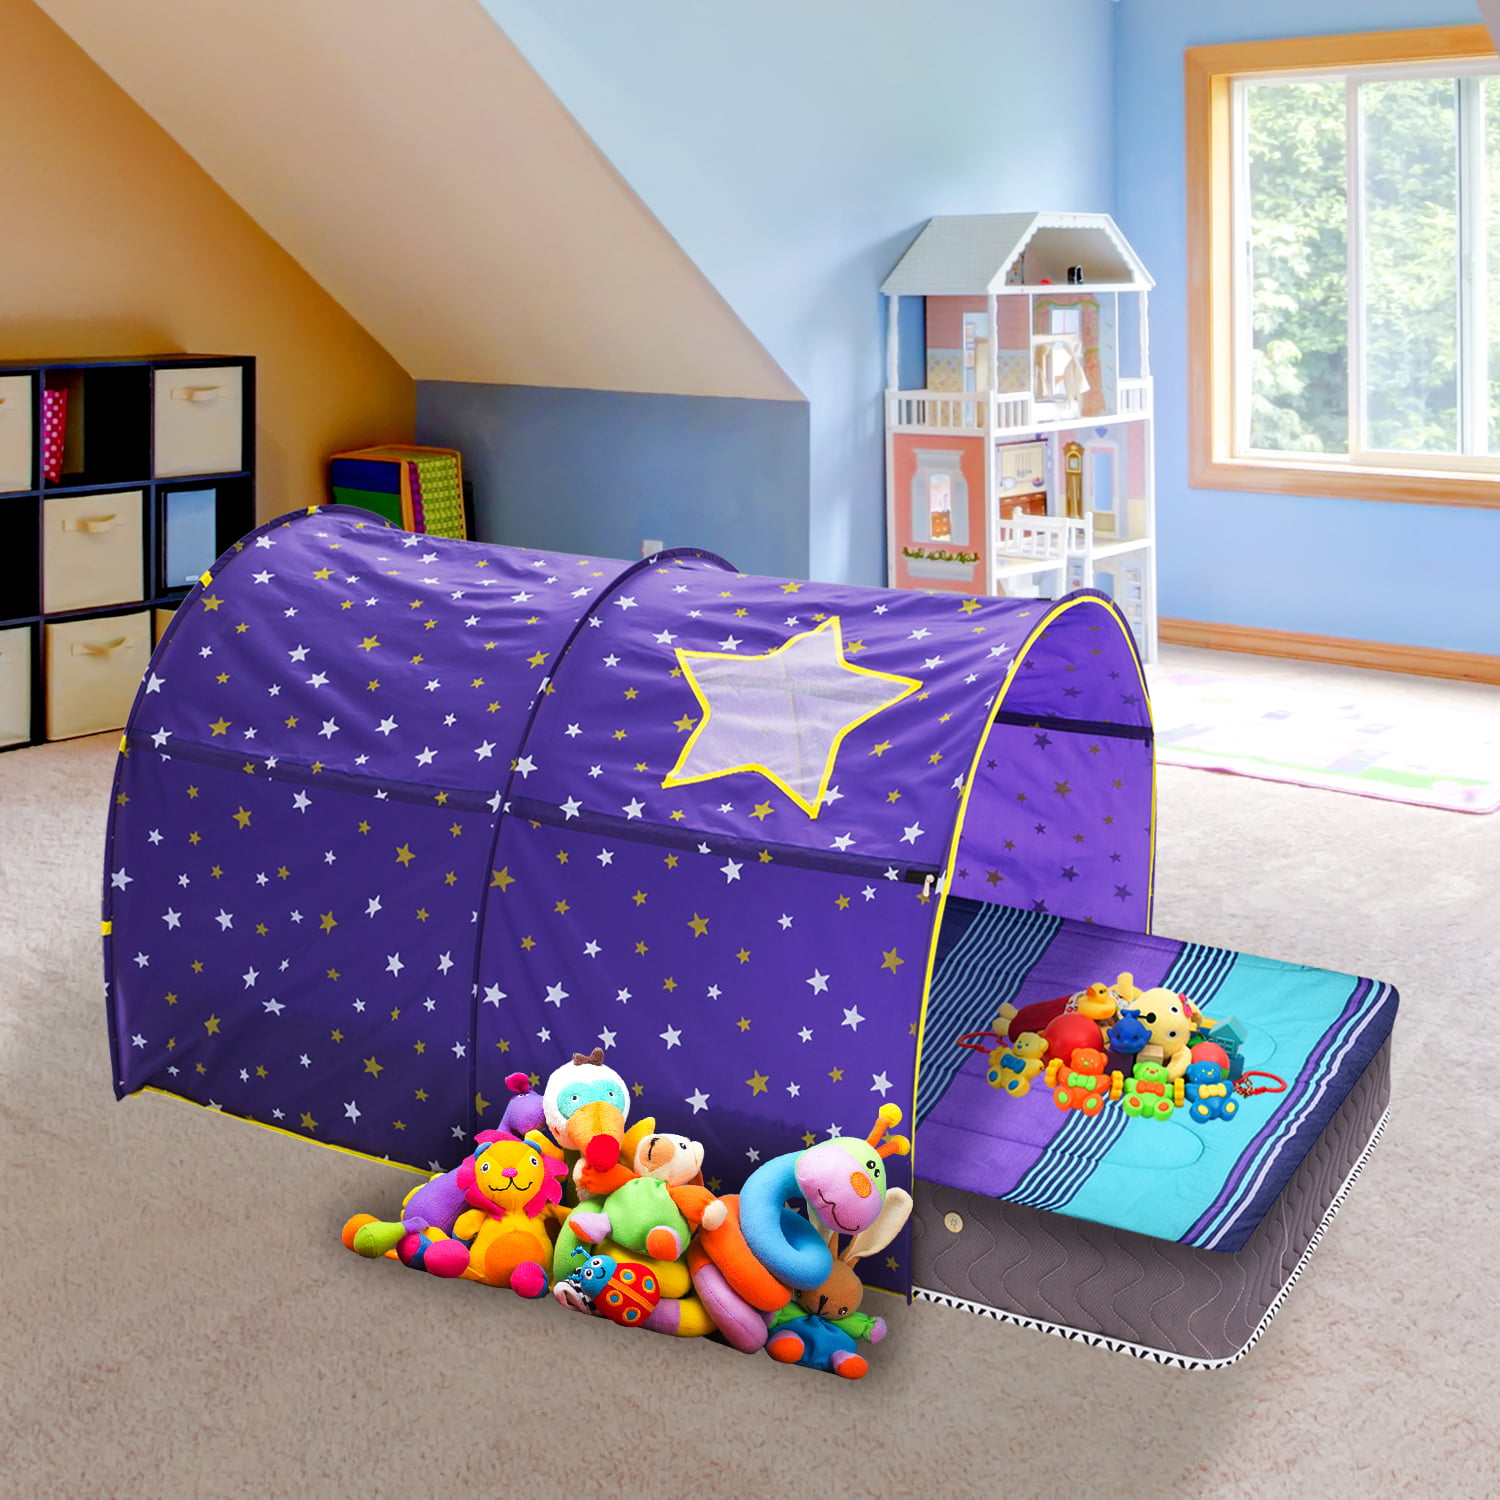 Kids Bed Tent Space Adventure Boys Pop up Play Tent Magic Playhouse Indoor Play 